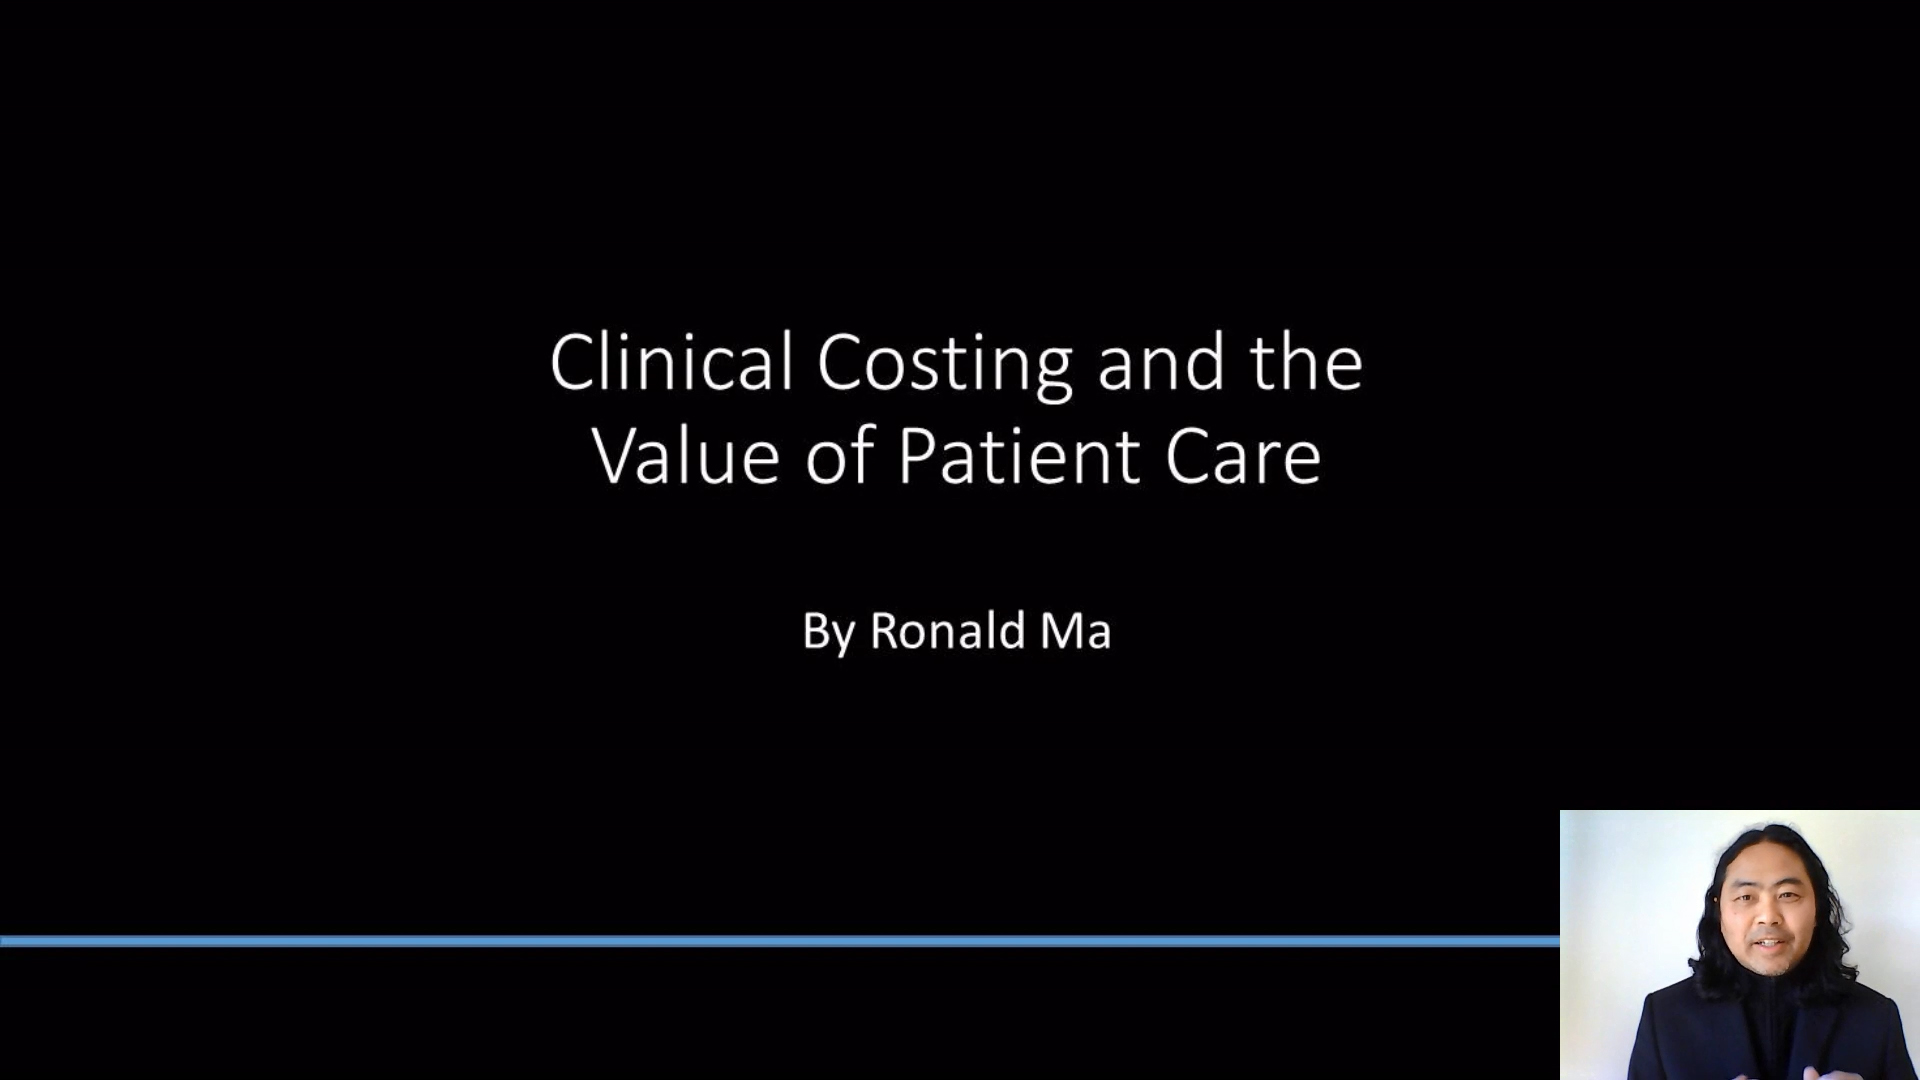 Clinical Costing and the Value of Patient Care